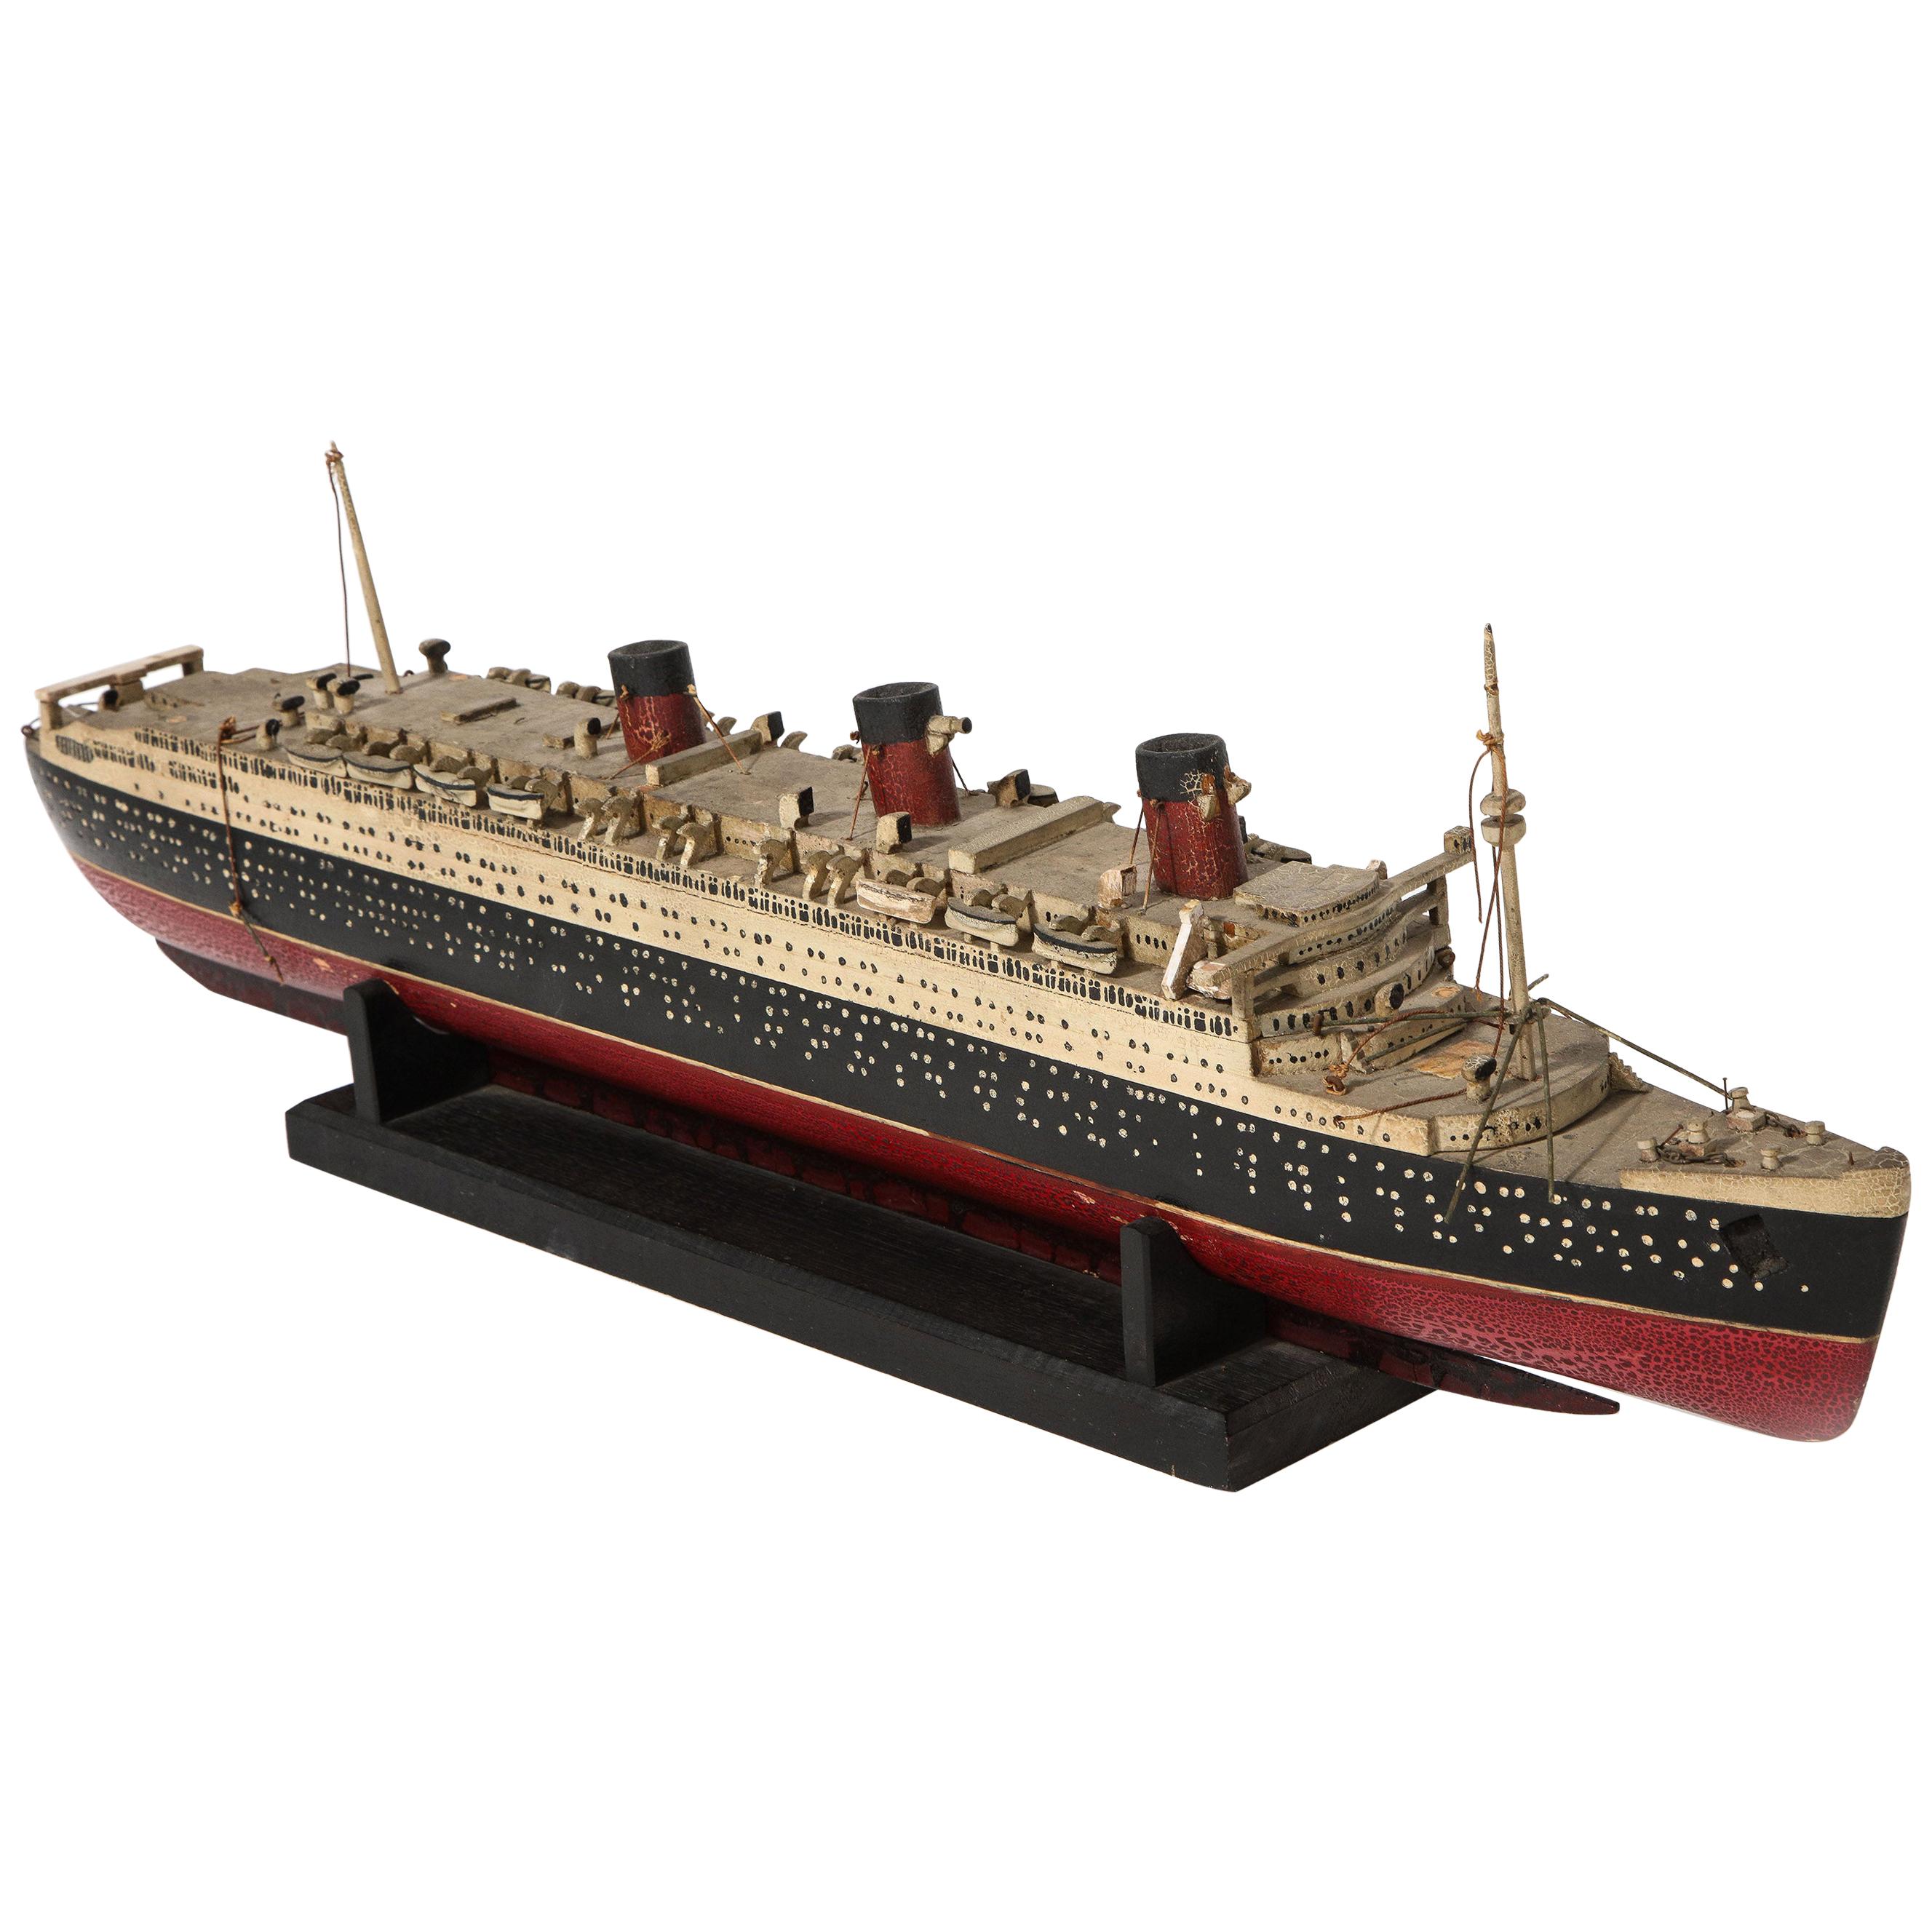 Early Handmade Wood Model of the RMS Queen Mary